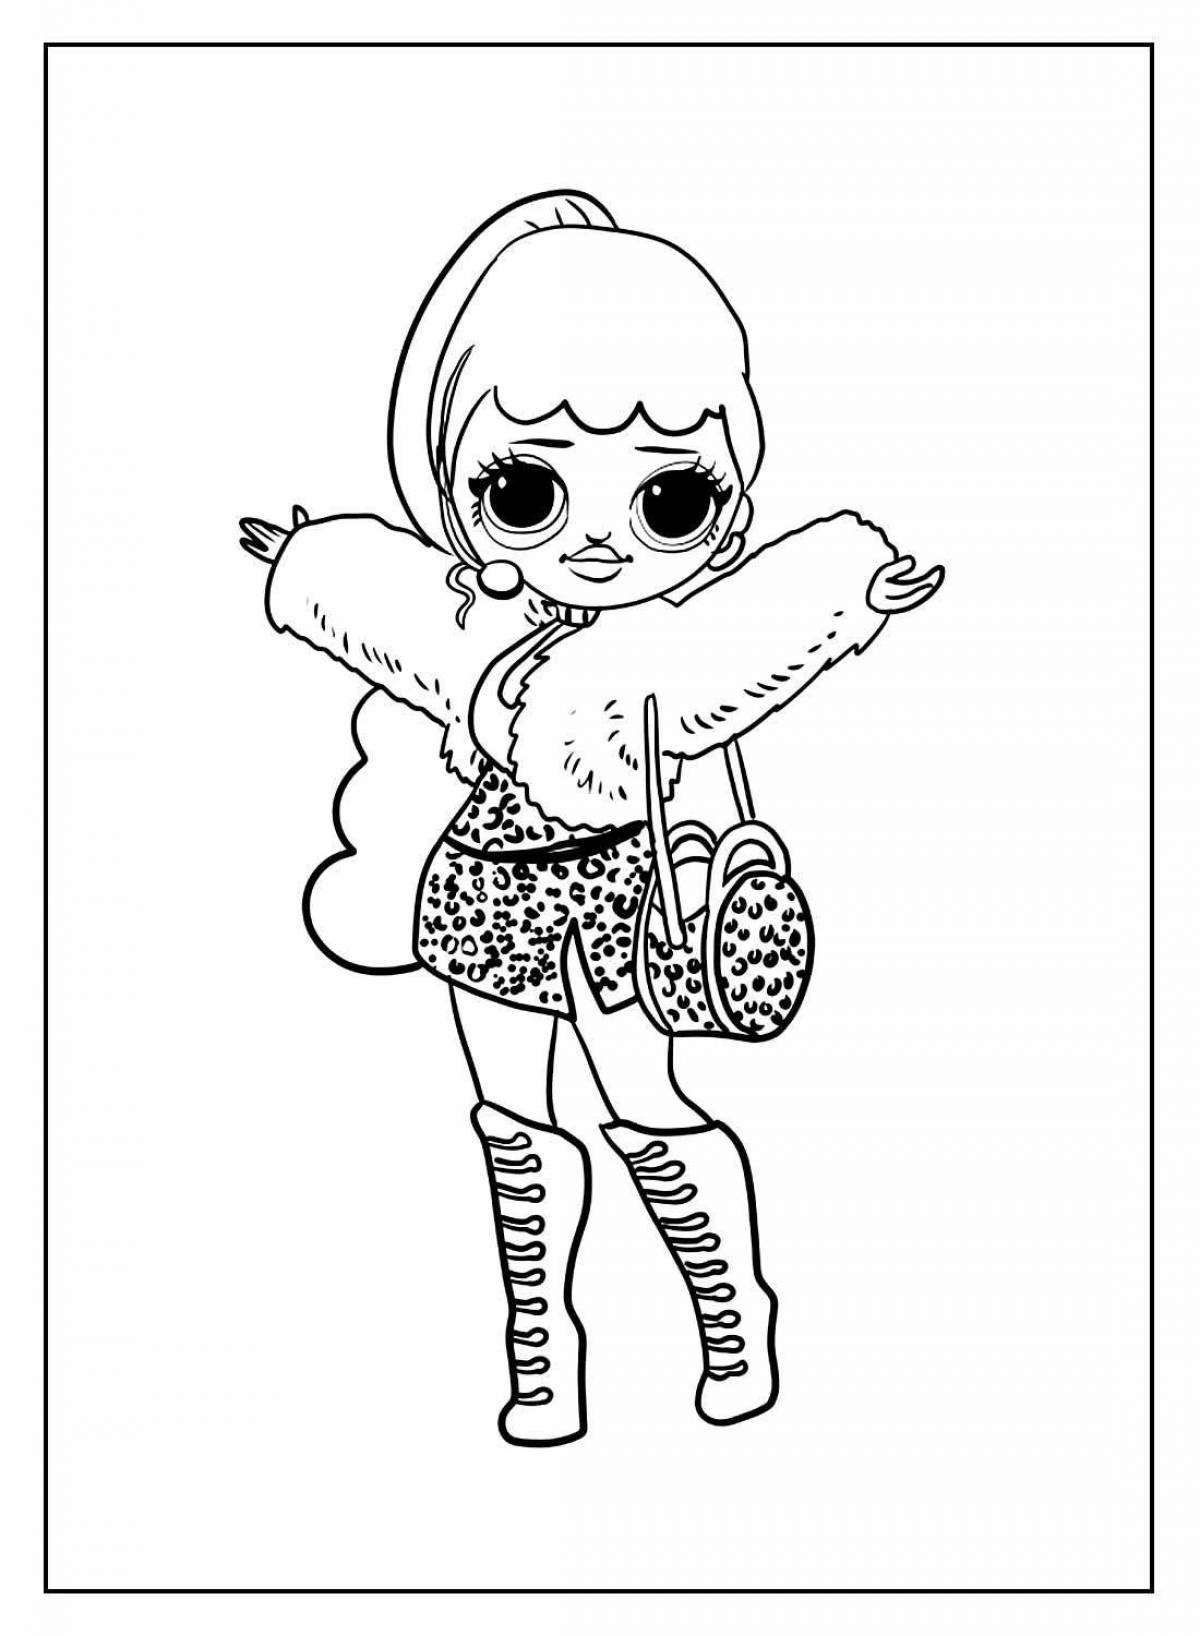 Wonderful doll lol teen coloring page